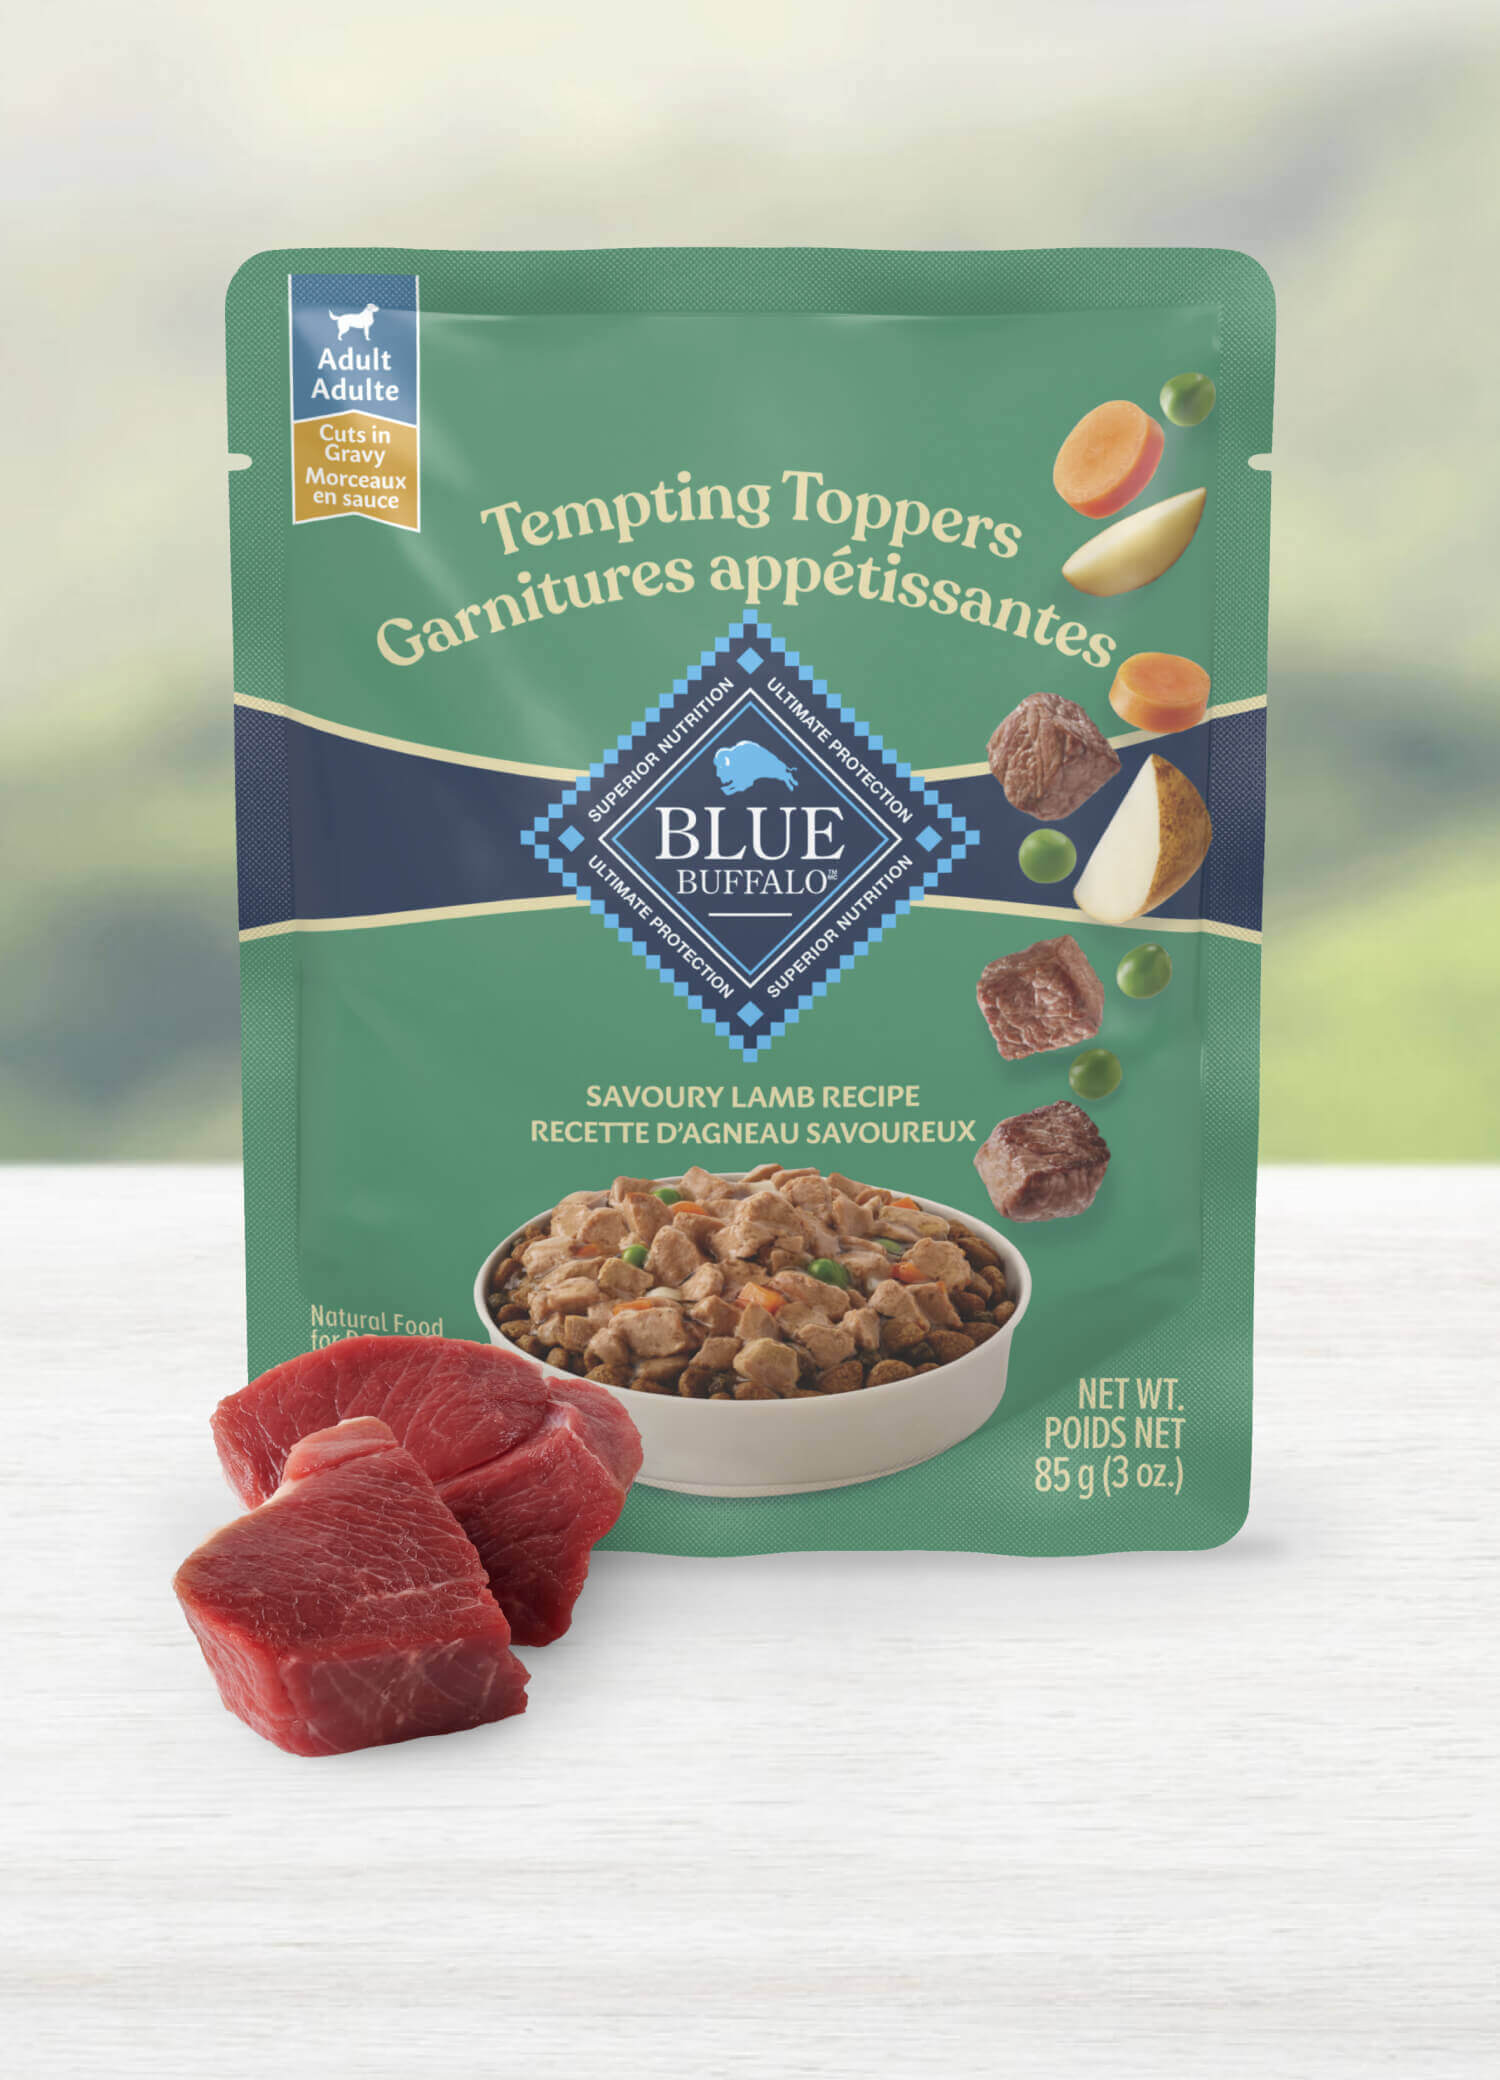 A bag of Blue Tempting Topper Savoury Lamb Recipe wet dog food